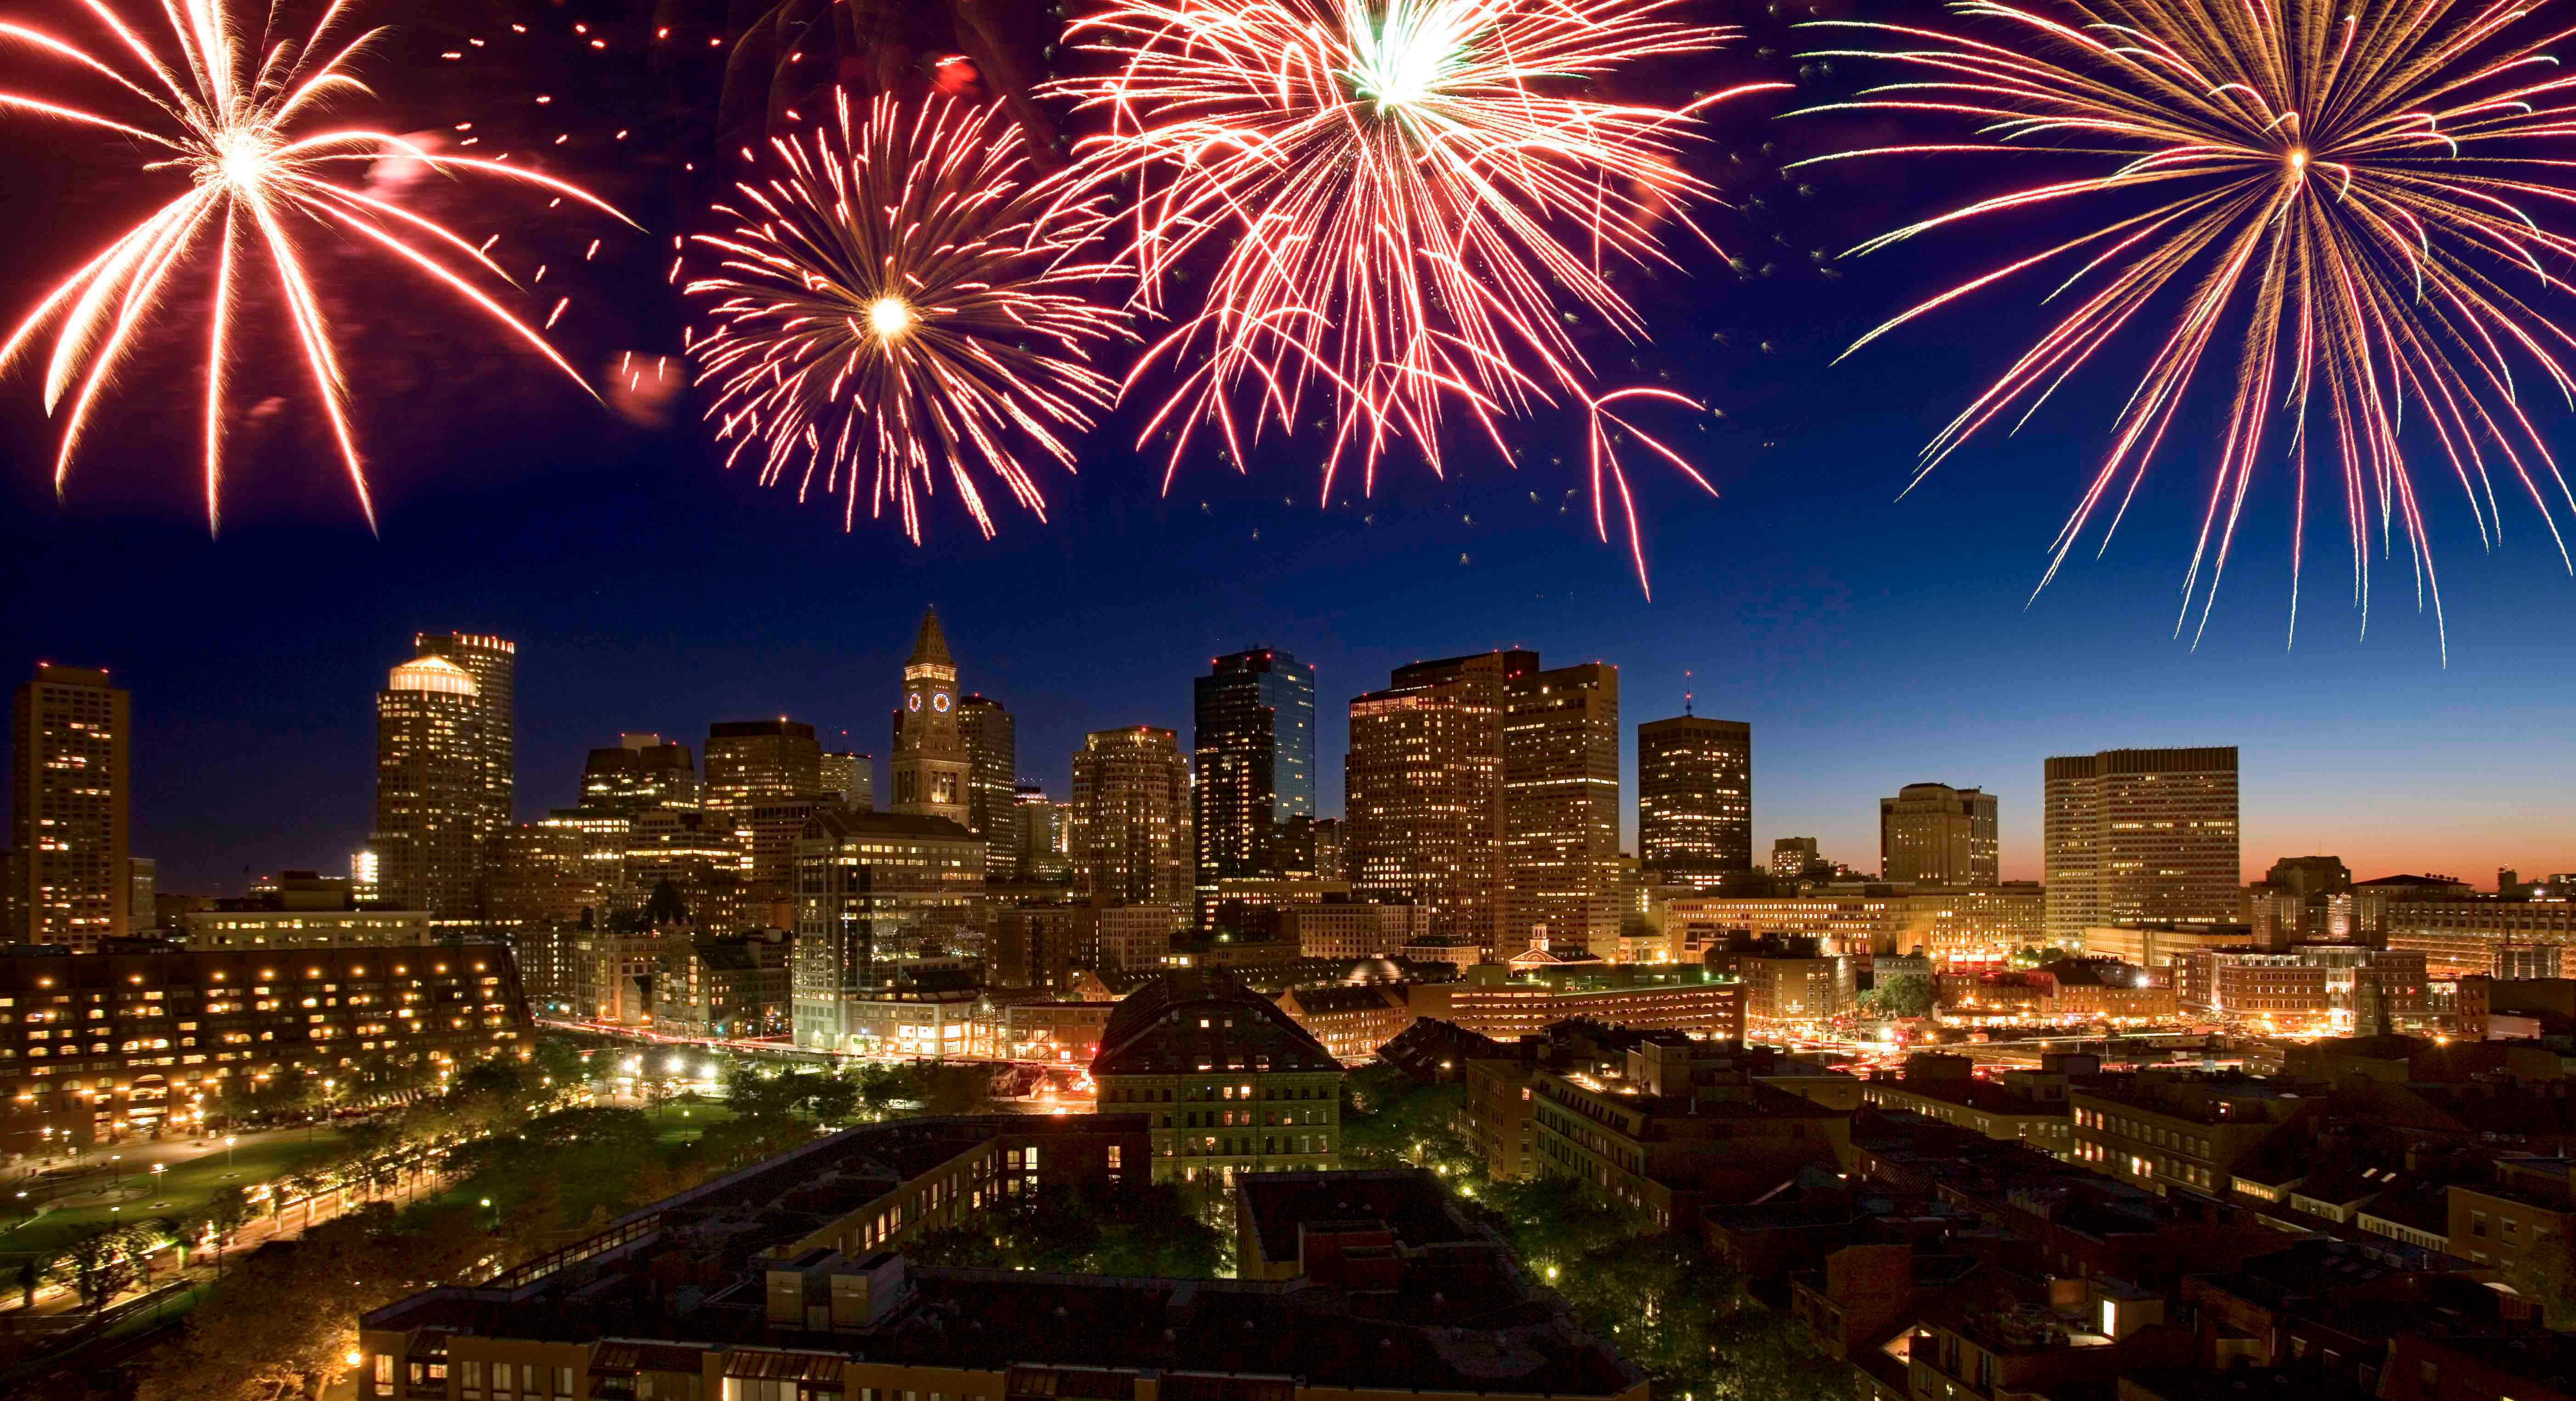 A fireworks display goes off in the Boston skyline.